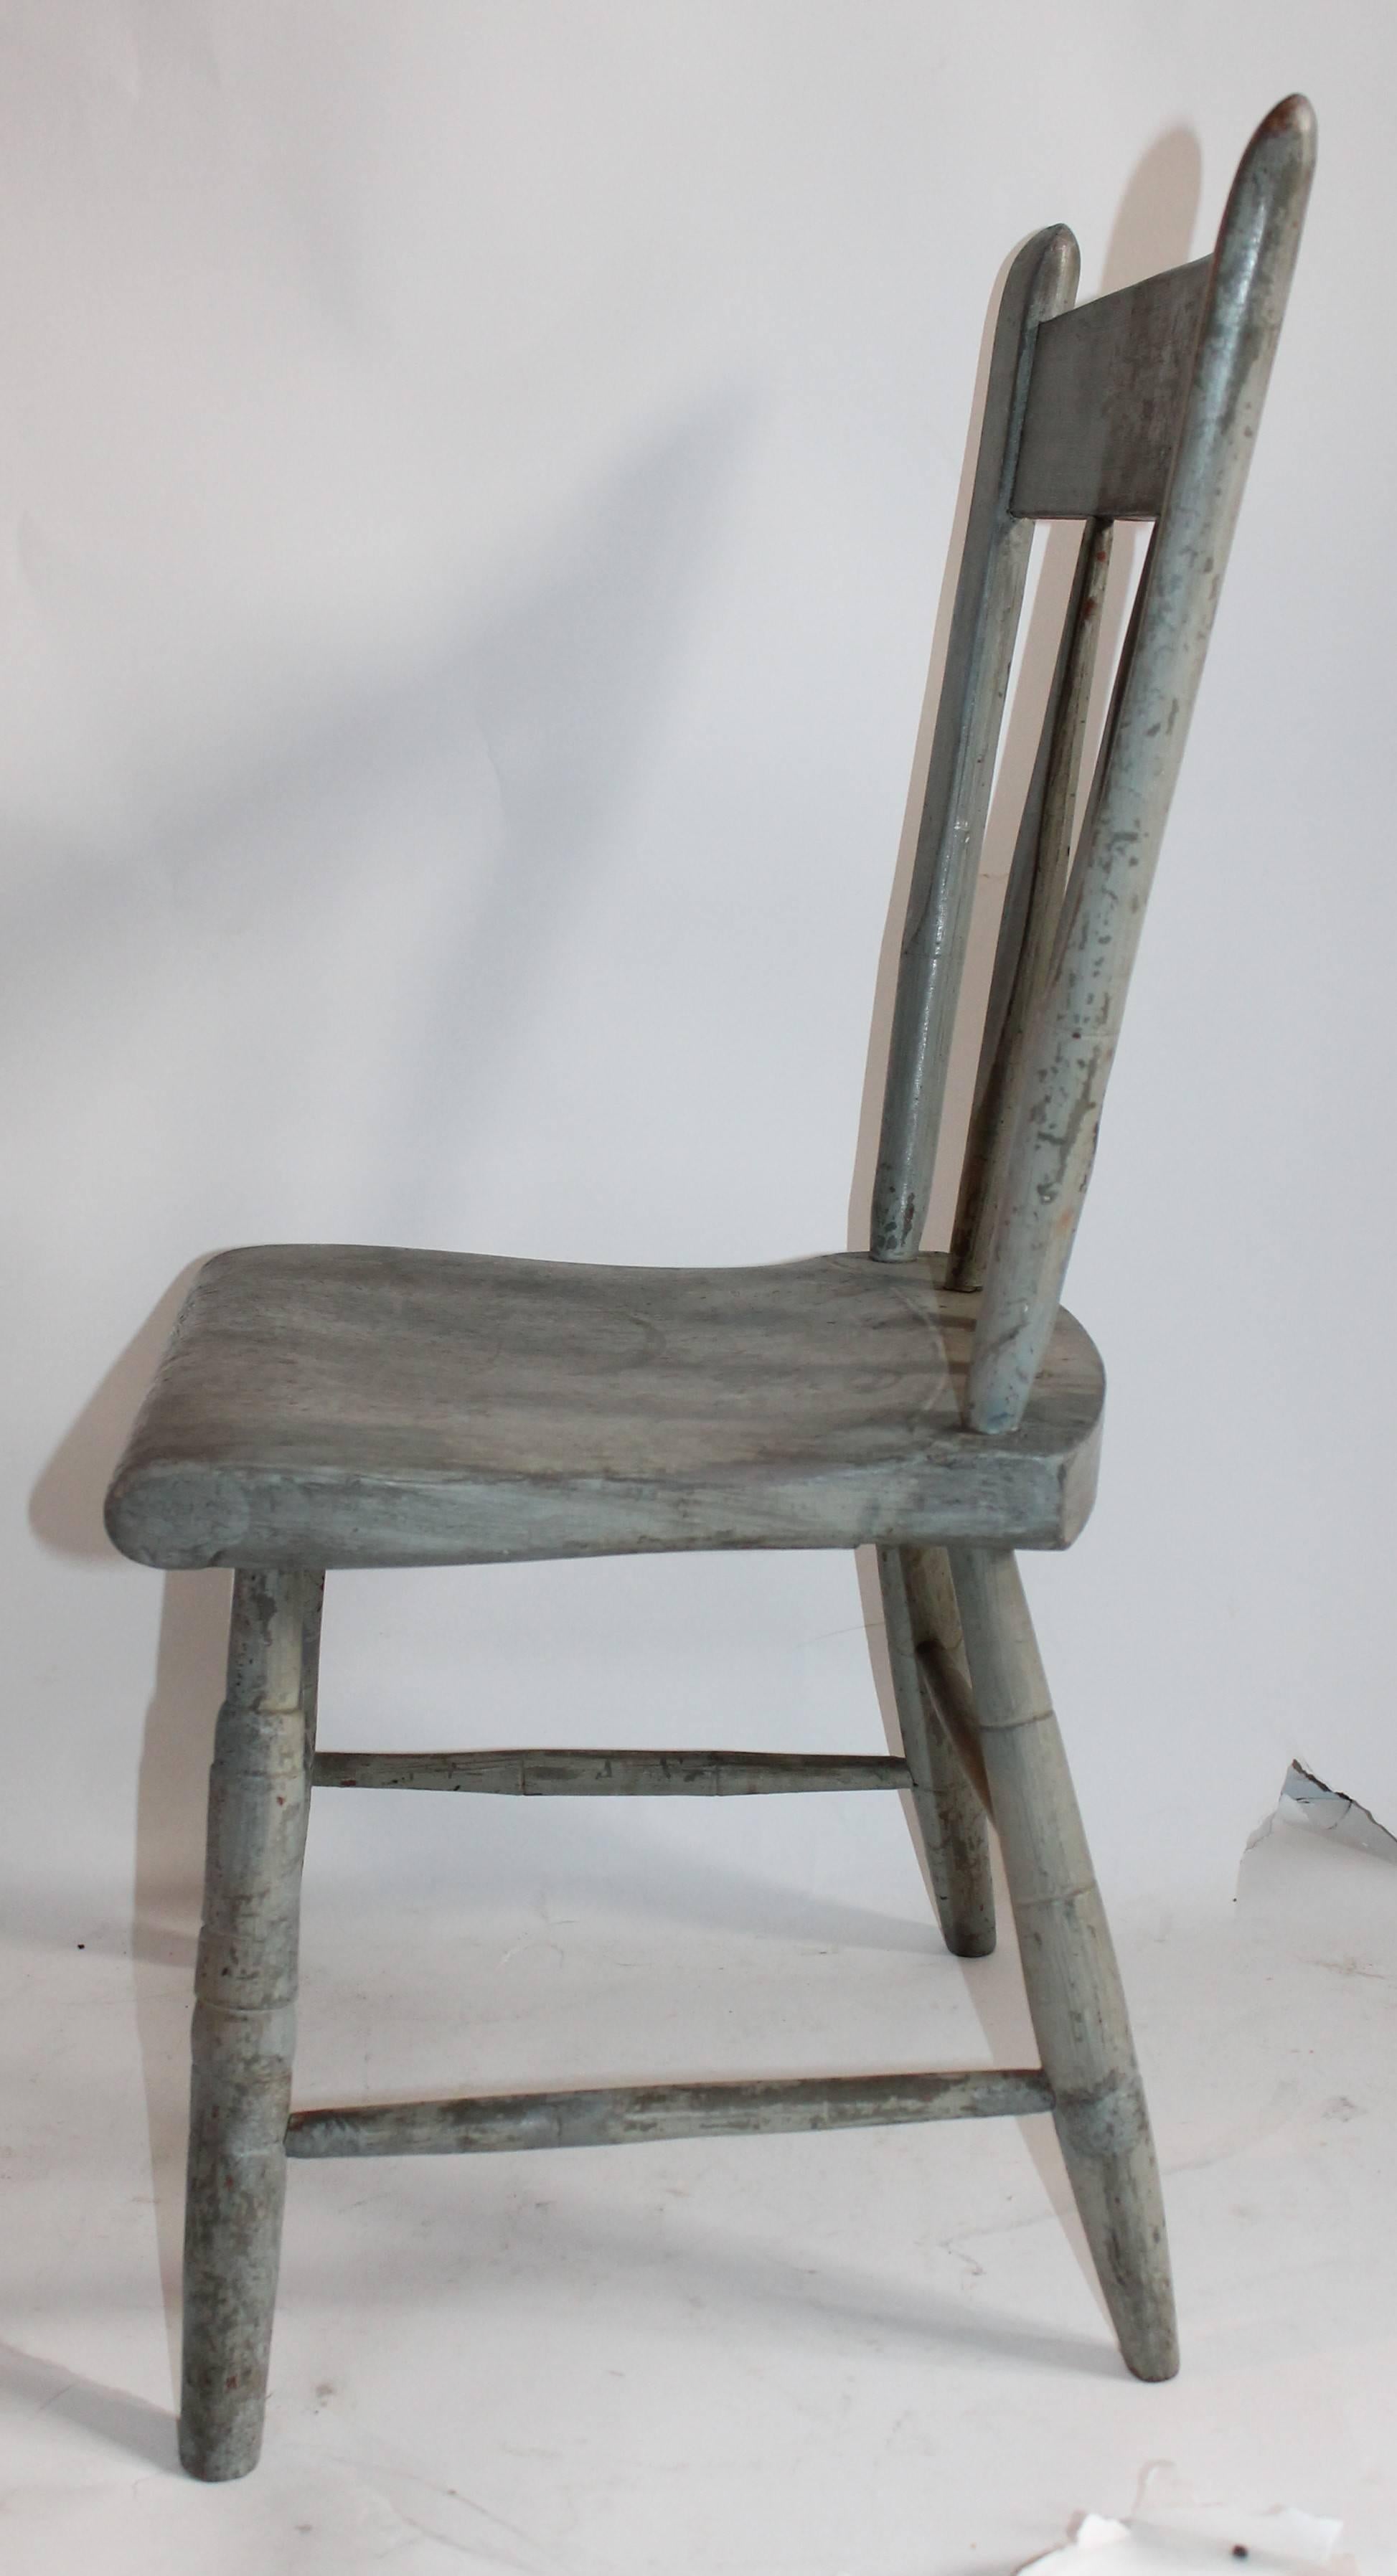 This fine arrow back windsor child's chair is in fine condition and all original painted grey surface. It is arrow back windsor chair from New England.